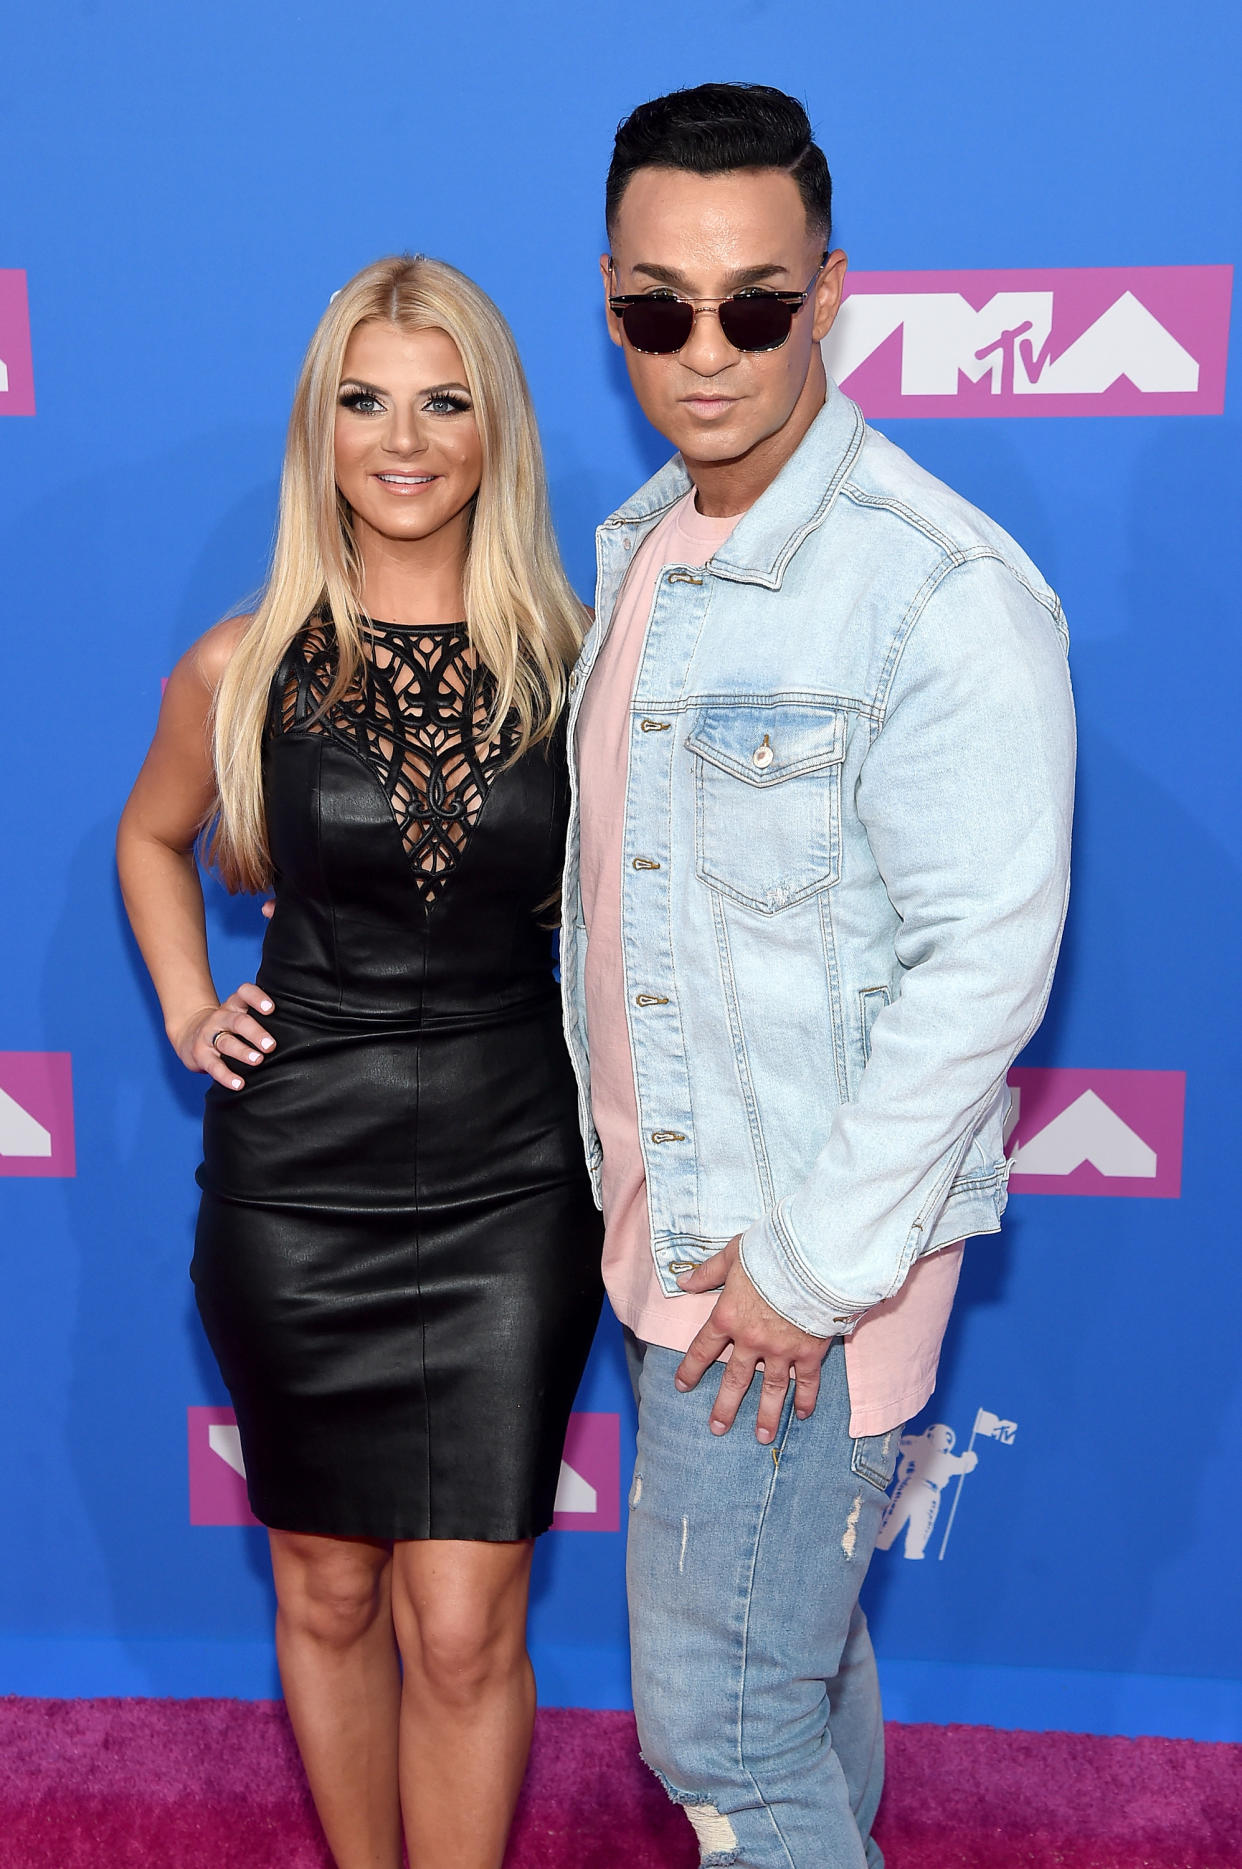 NEW YORK, NY - AUGUST 20:  Lauren Pesce and Mike “The Situation” Sorrentino attend the 2018 MTV Video Music Awards at Radio City Music Hall on August 20, 2018 in New York City.  (Photo by Jamie McCarthy/Getty Images)